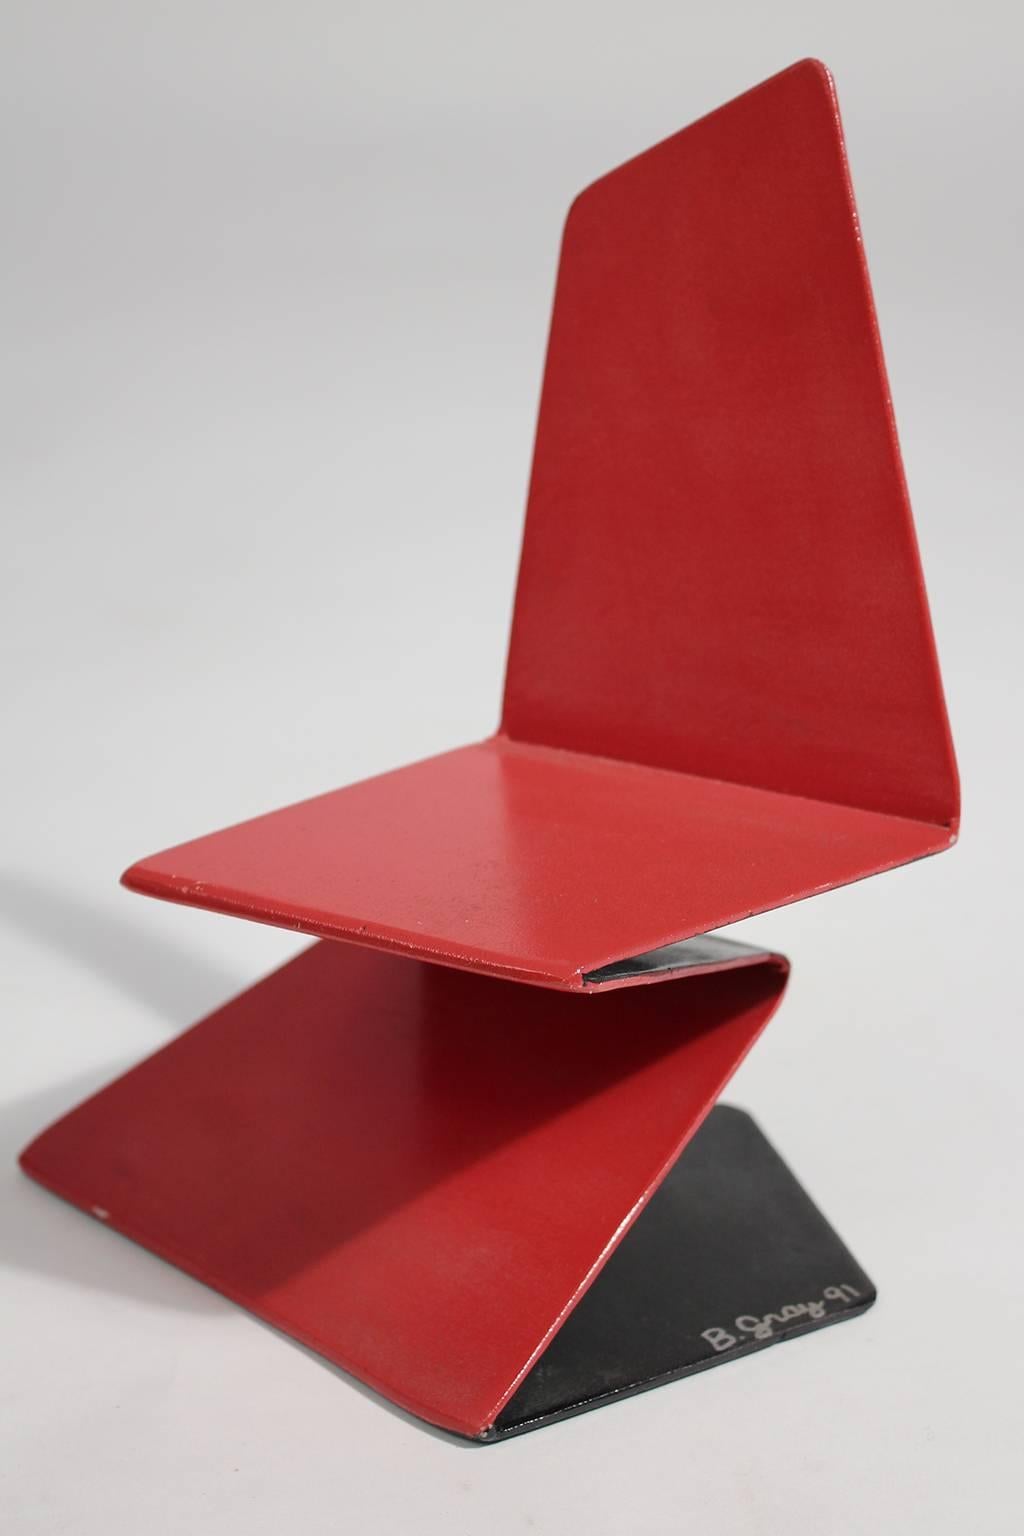 Bruce Gray Abstract Enamel and Steel Furniture Design Model Sculpture In Excellent Condition For Sale In San Diego, CA